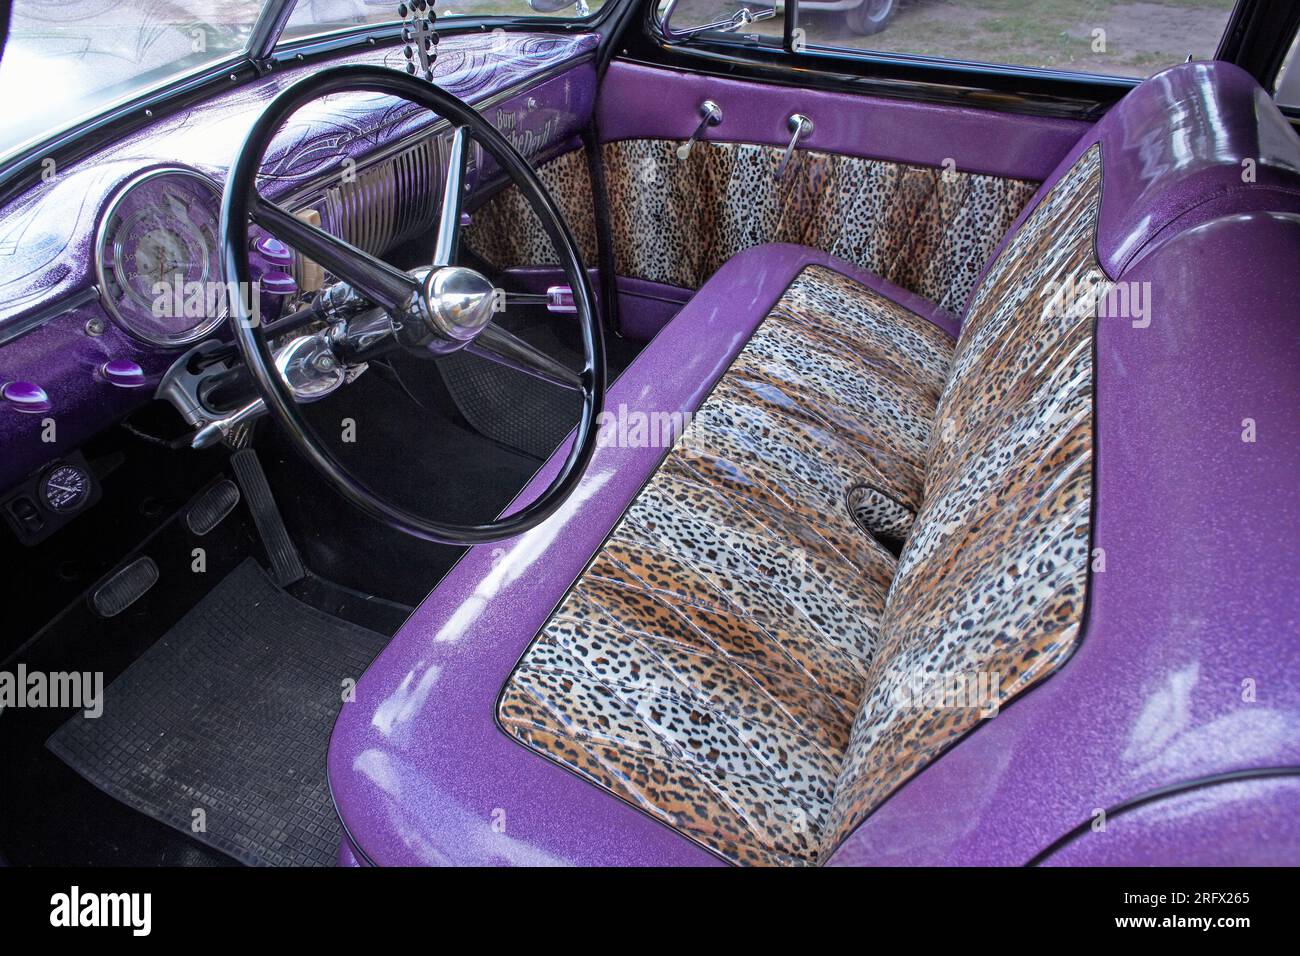 Classic American car interior with leopard skin print seats .Leopard print car seat cover Stock Photo